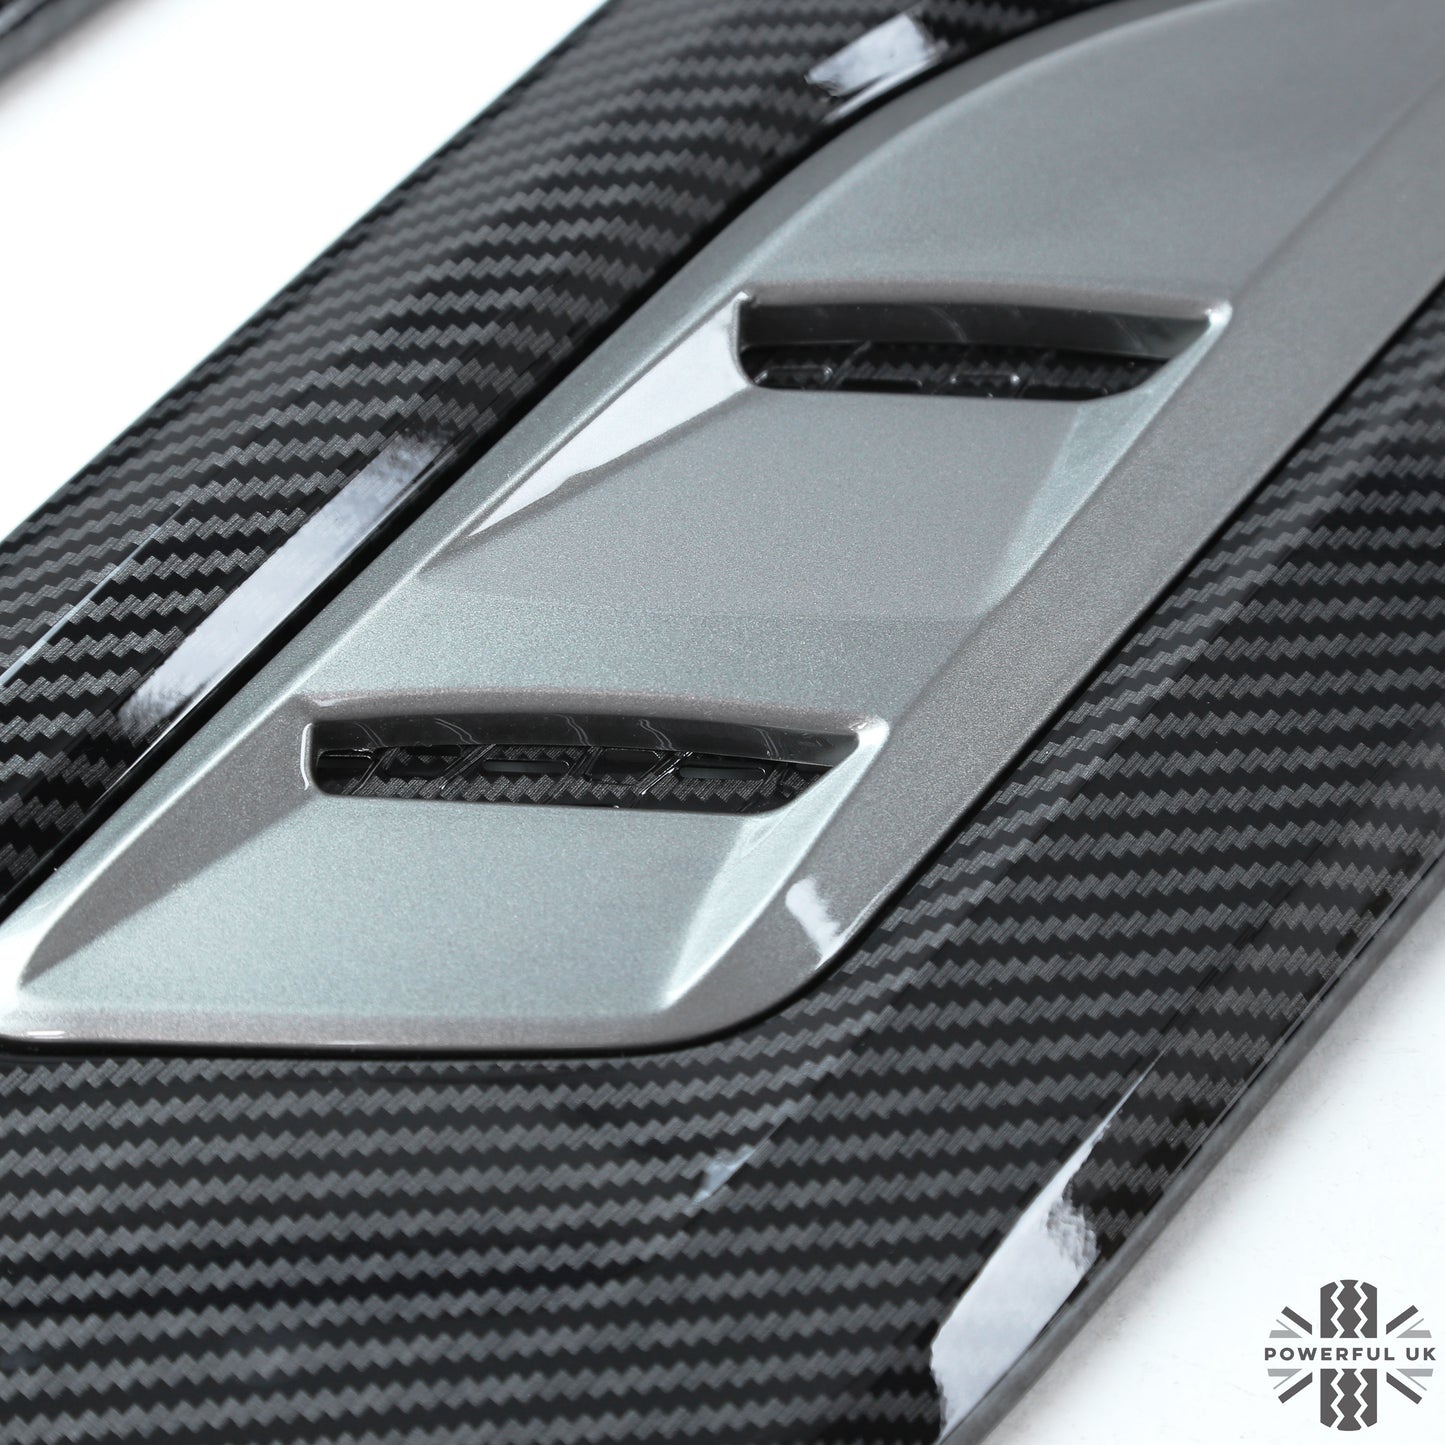 Bonnet Vents for Land Rover Discovery 3/4 - Carbon & Grey